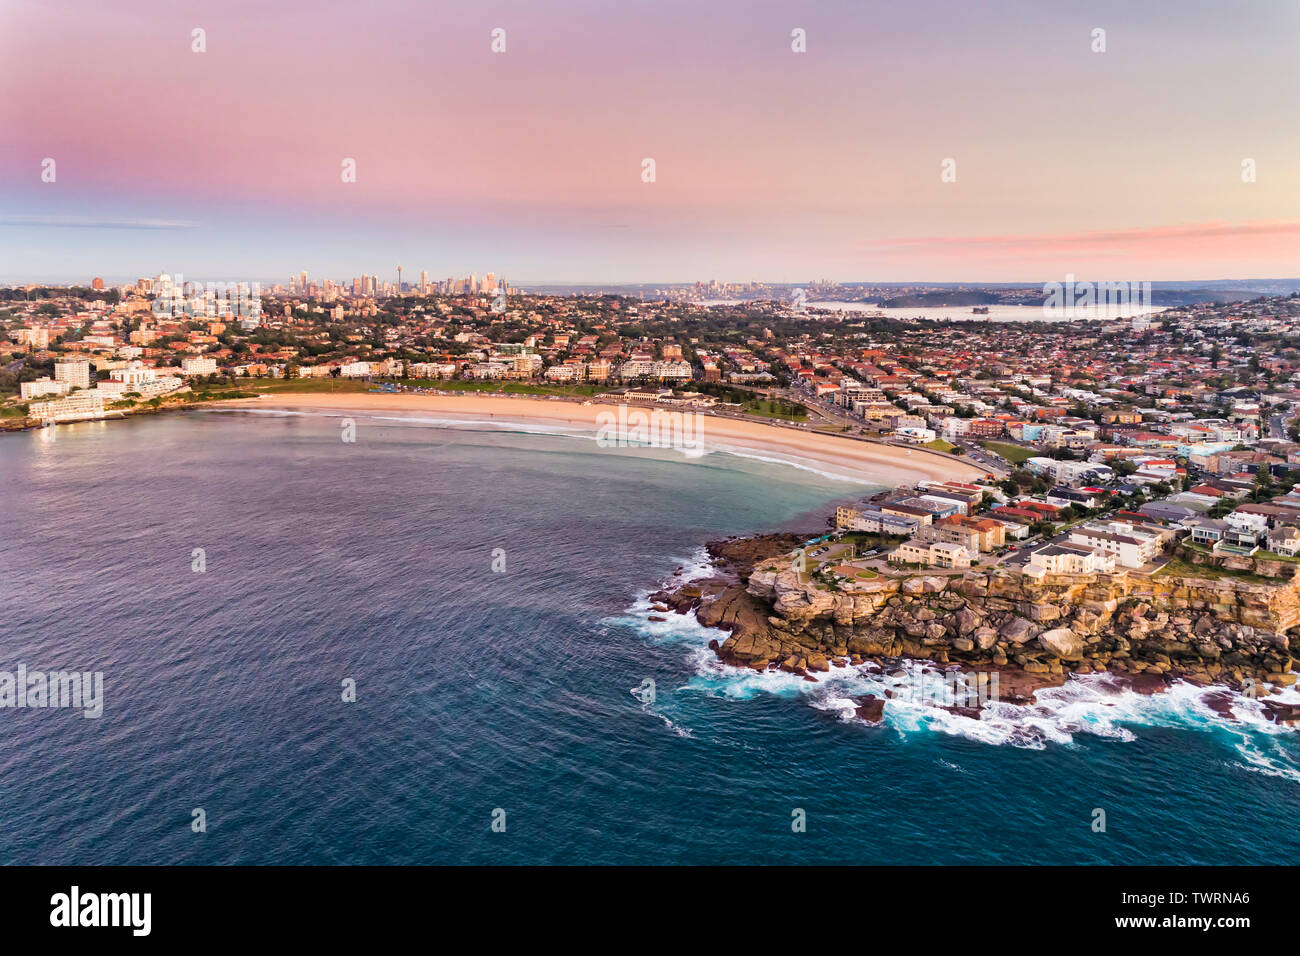 North Bondi sandstone cliff of headland guarding famours Bondi Beach of Sydney from open waves of Pacific ocean in aerial sunrise view towards distant Stock Photo